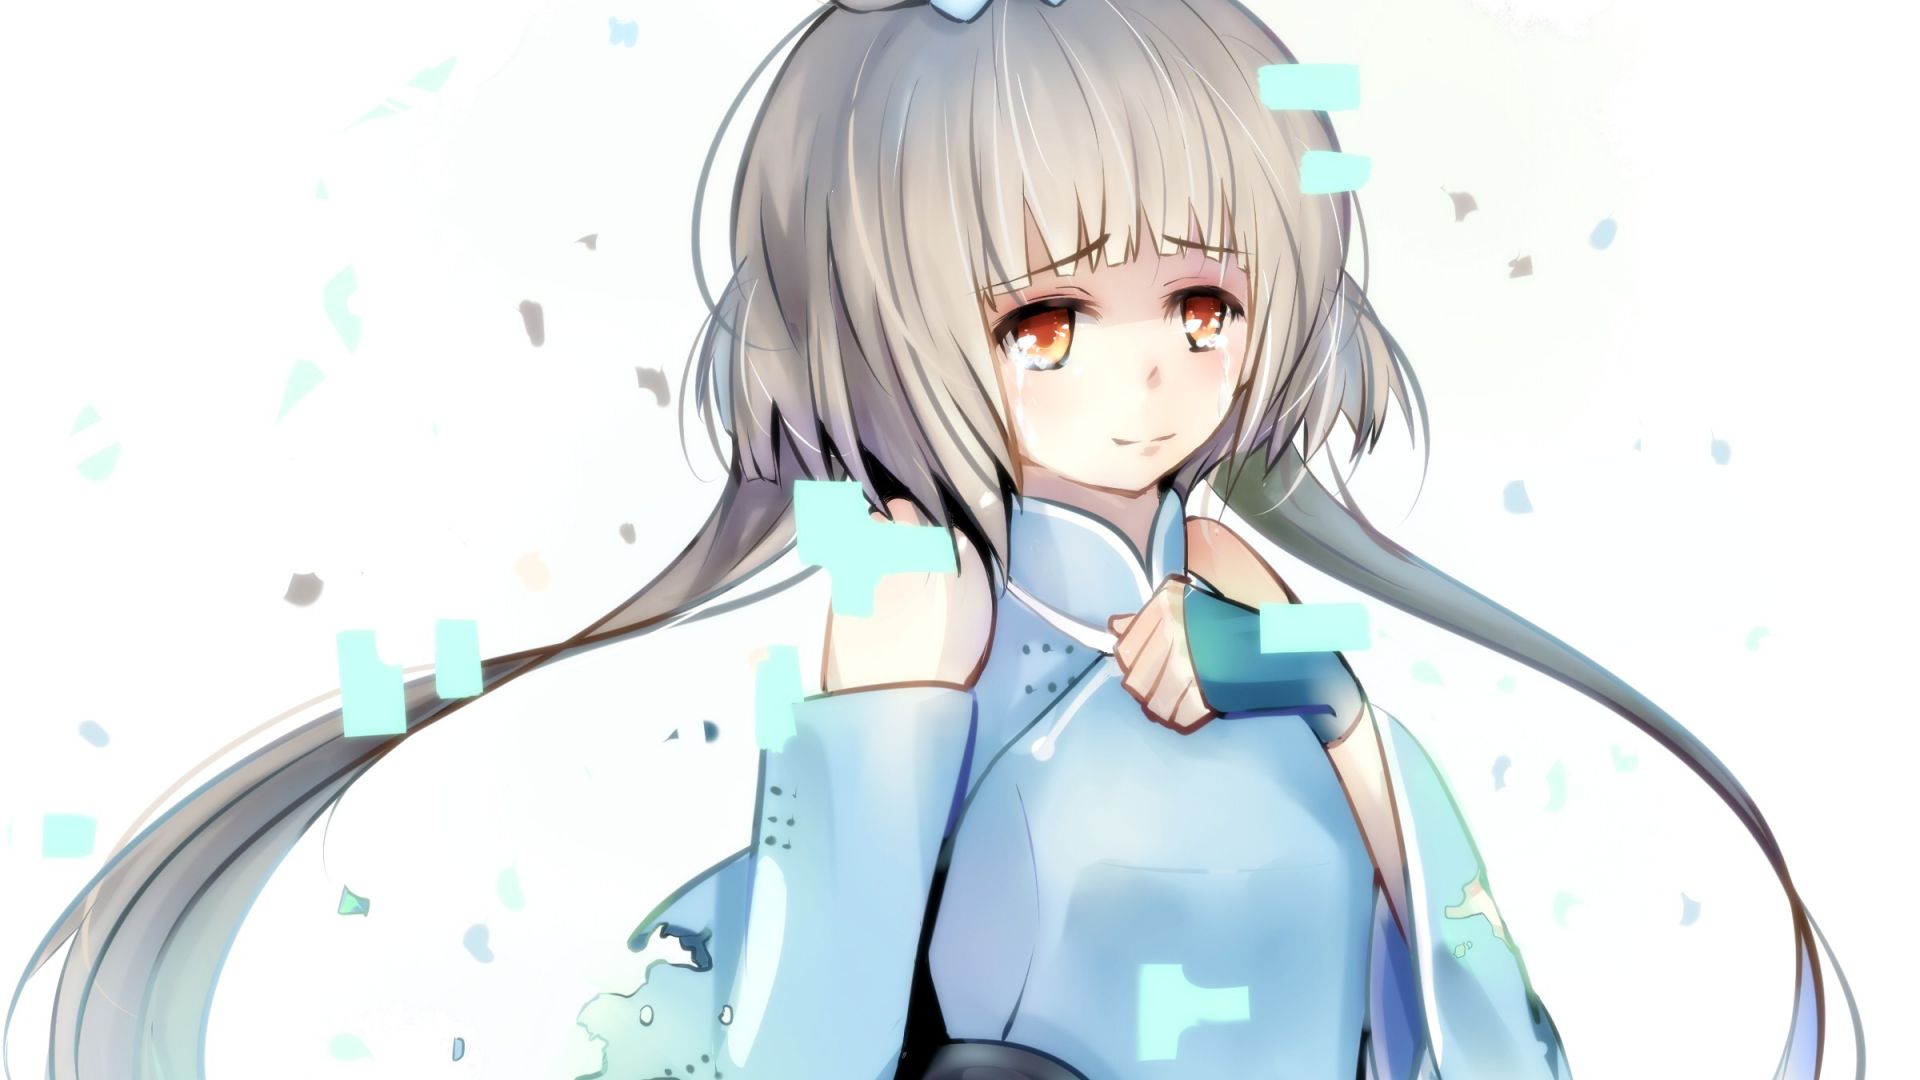 Wallpaper Luo Tianyi, Vocaloid, cute anime girl